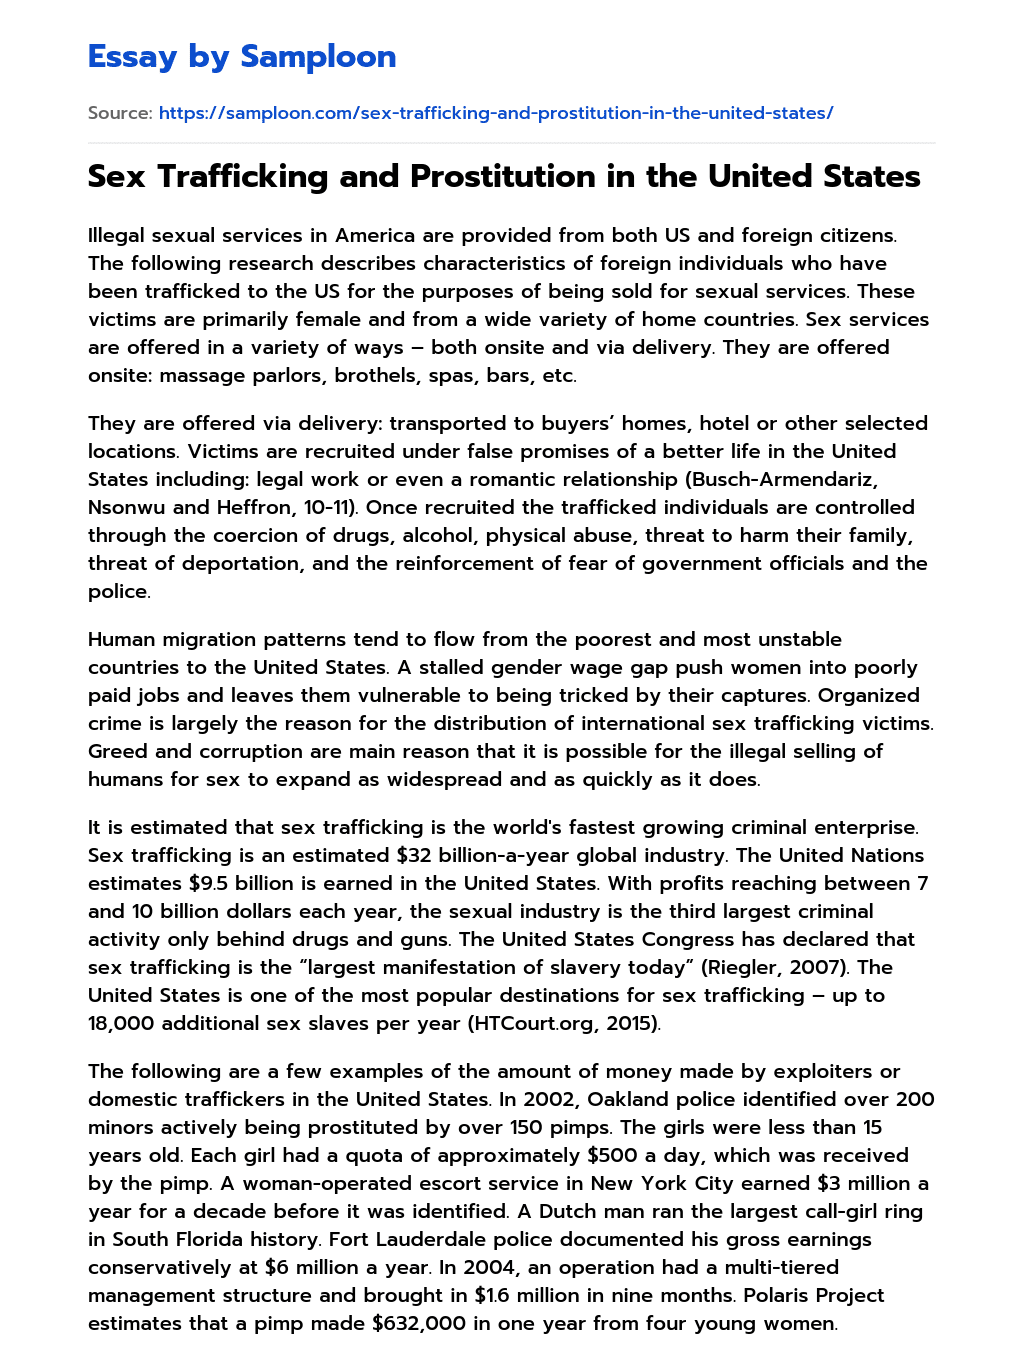 Sex Trafficking and Prostitution in the United States essay